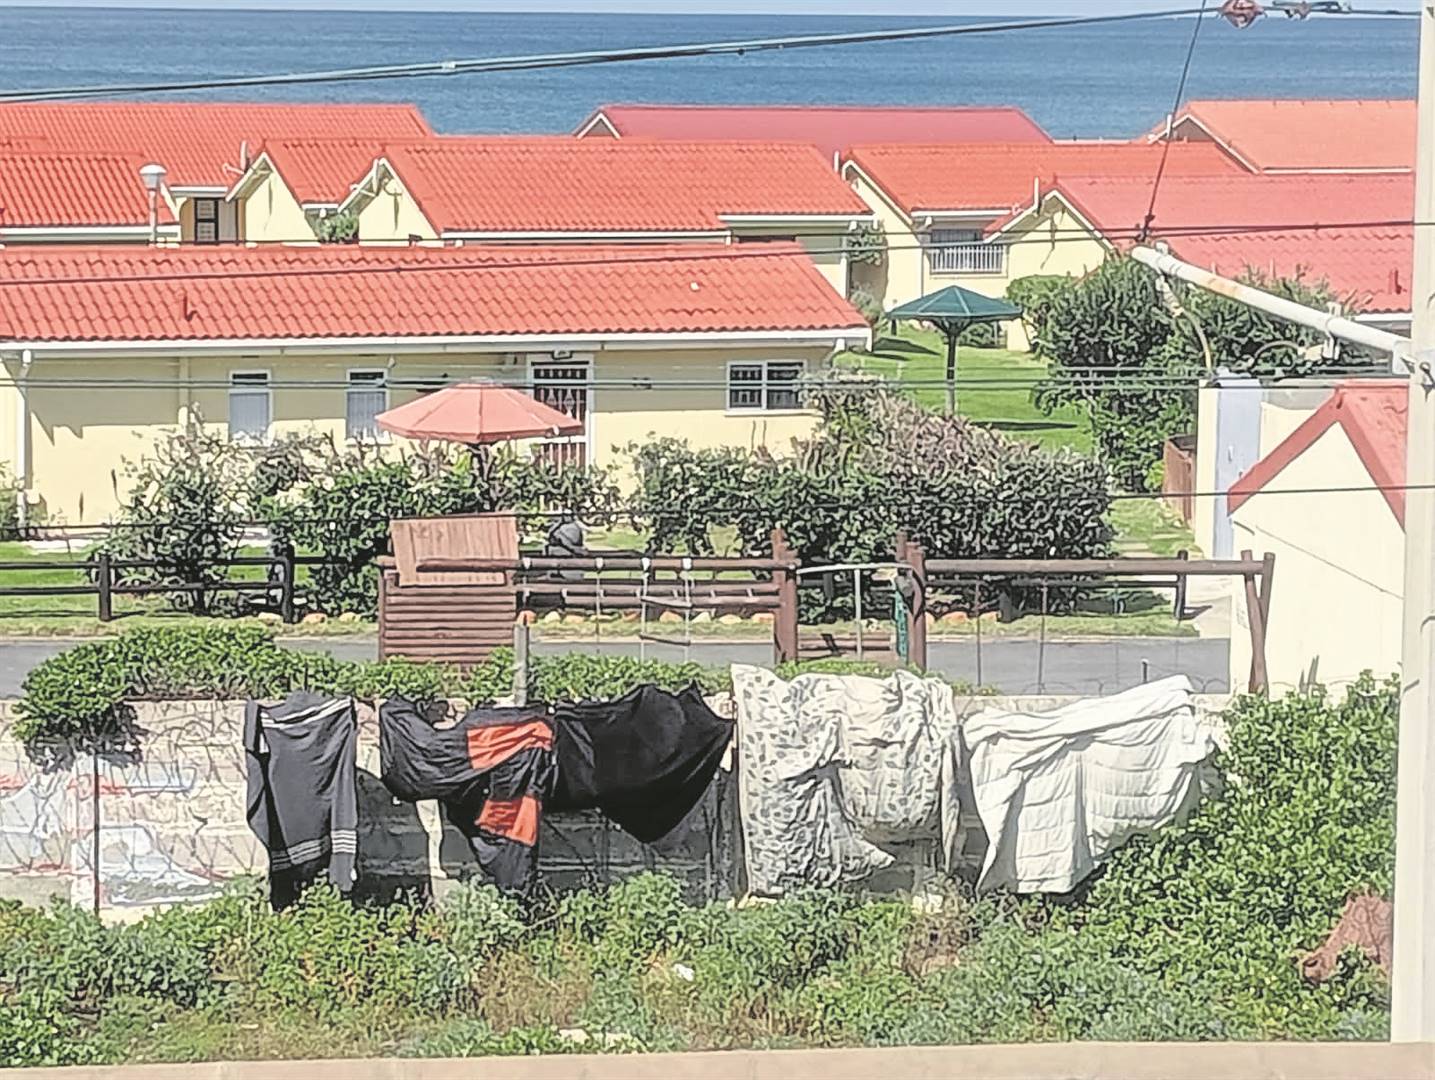 Blankets and tents hung over a wall next to the railway line, between South Shore and beach apartments in Fish Hoek where street people slept. PHOTO: Supplied